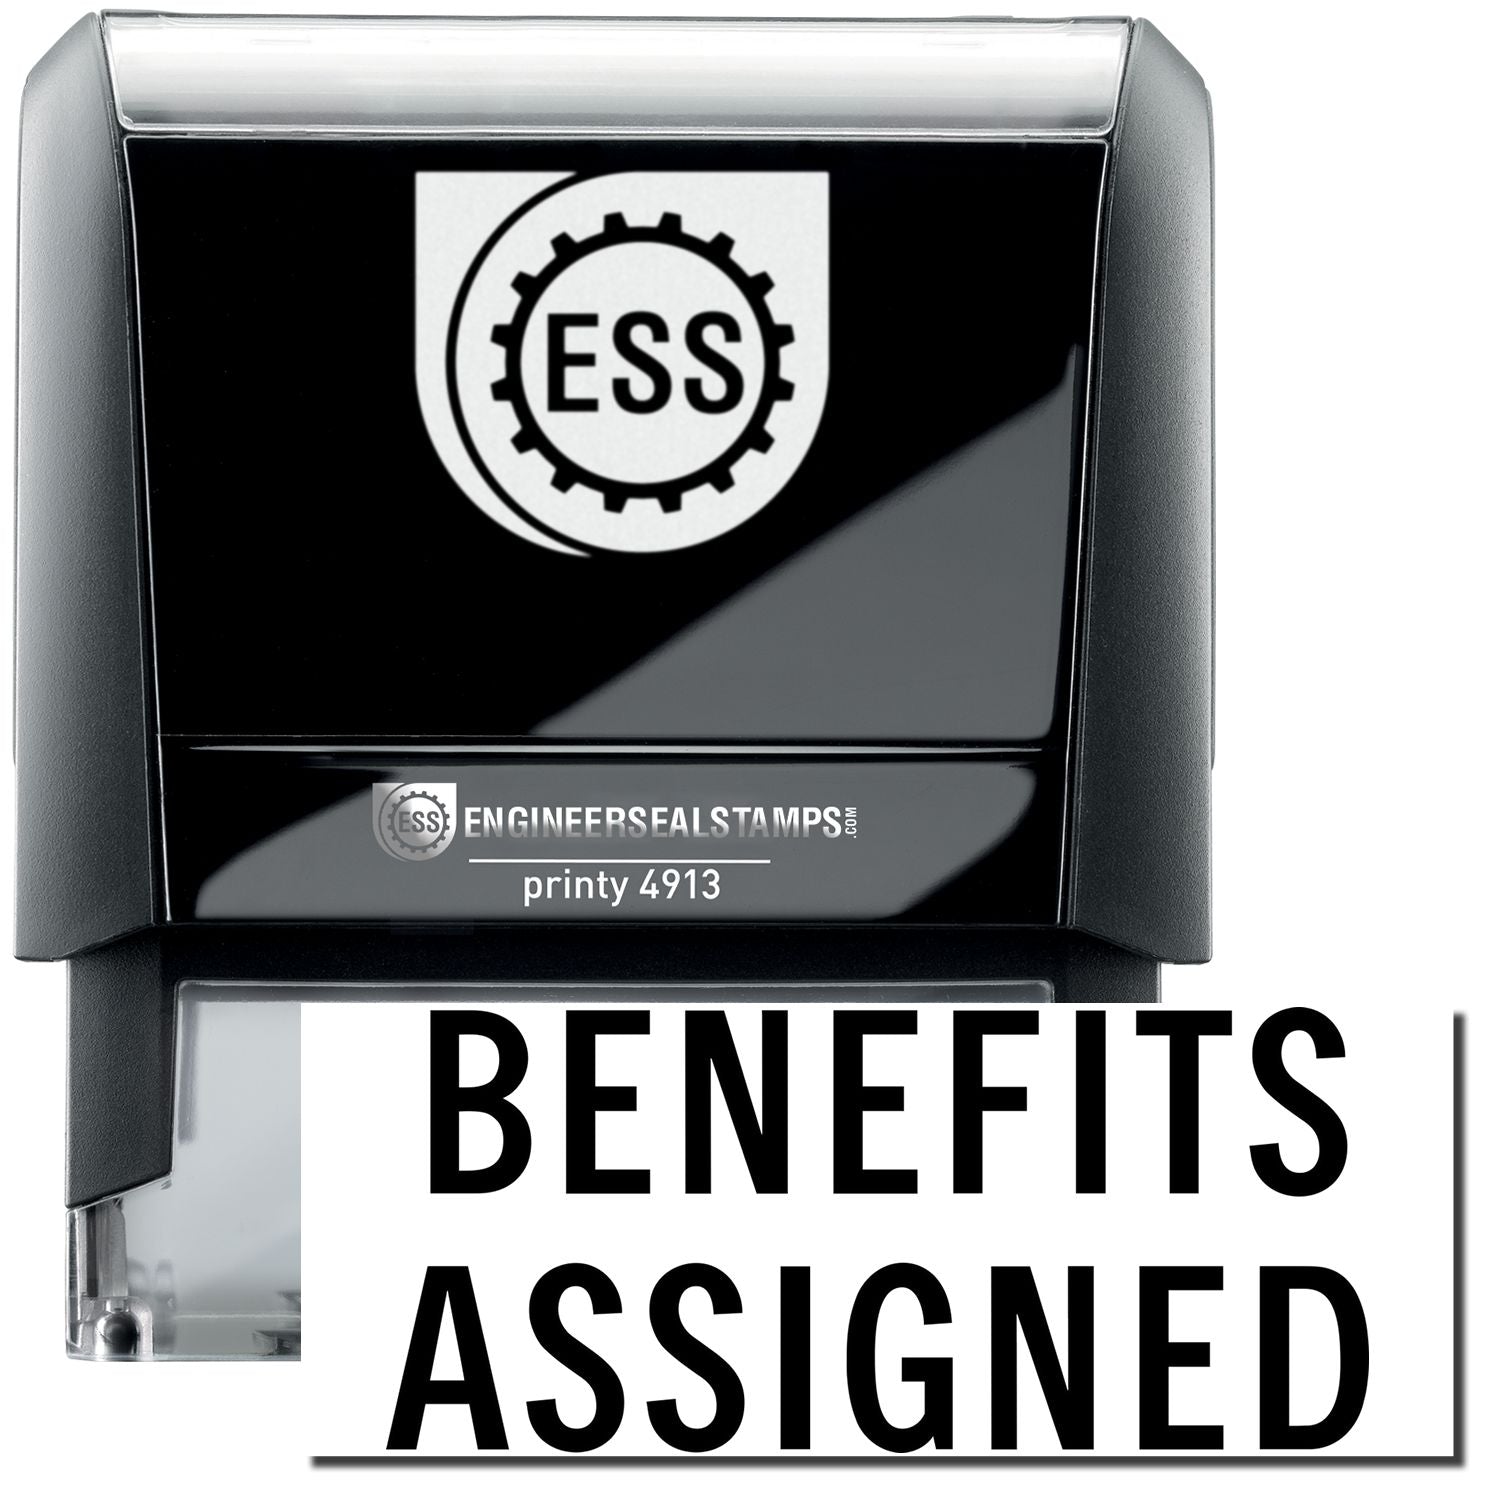 A self-inking stamp with a stamped image showing how the text "BENEFITS ASSIGNED" in a large font is displayed by it after stamping.